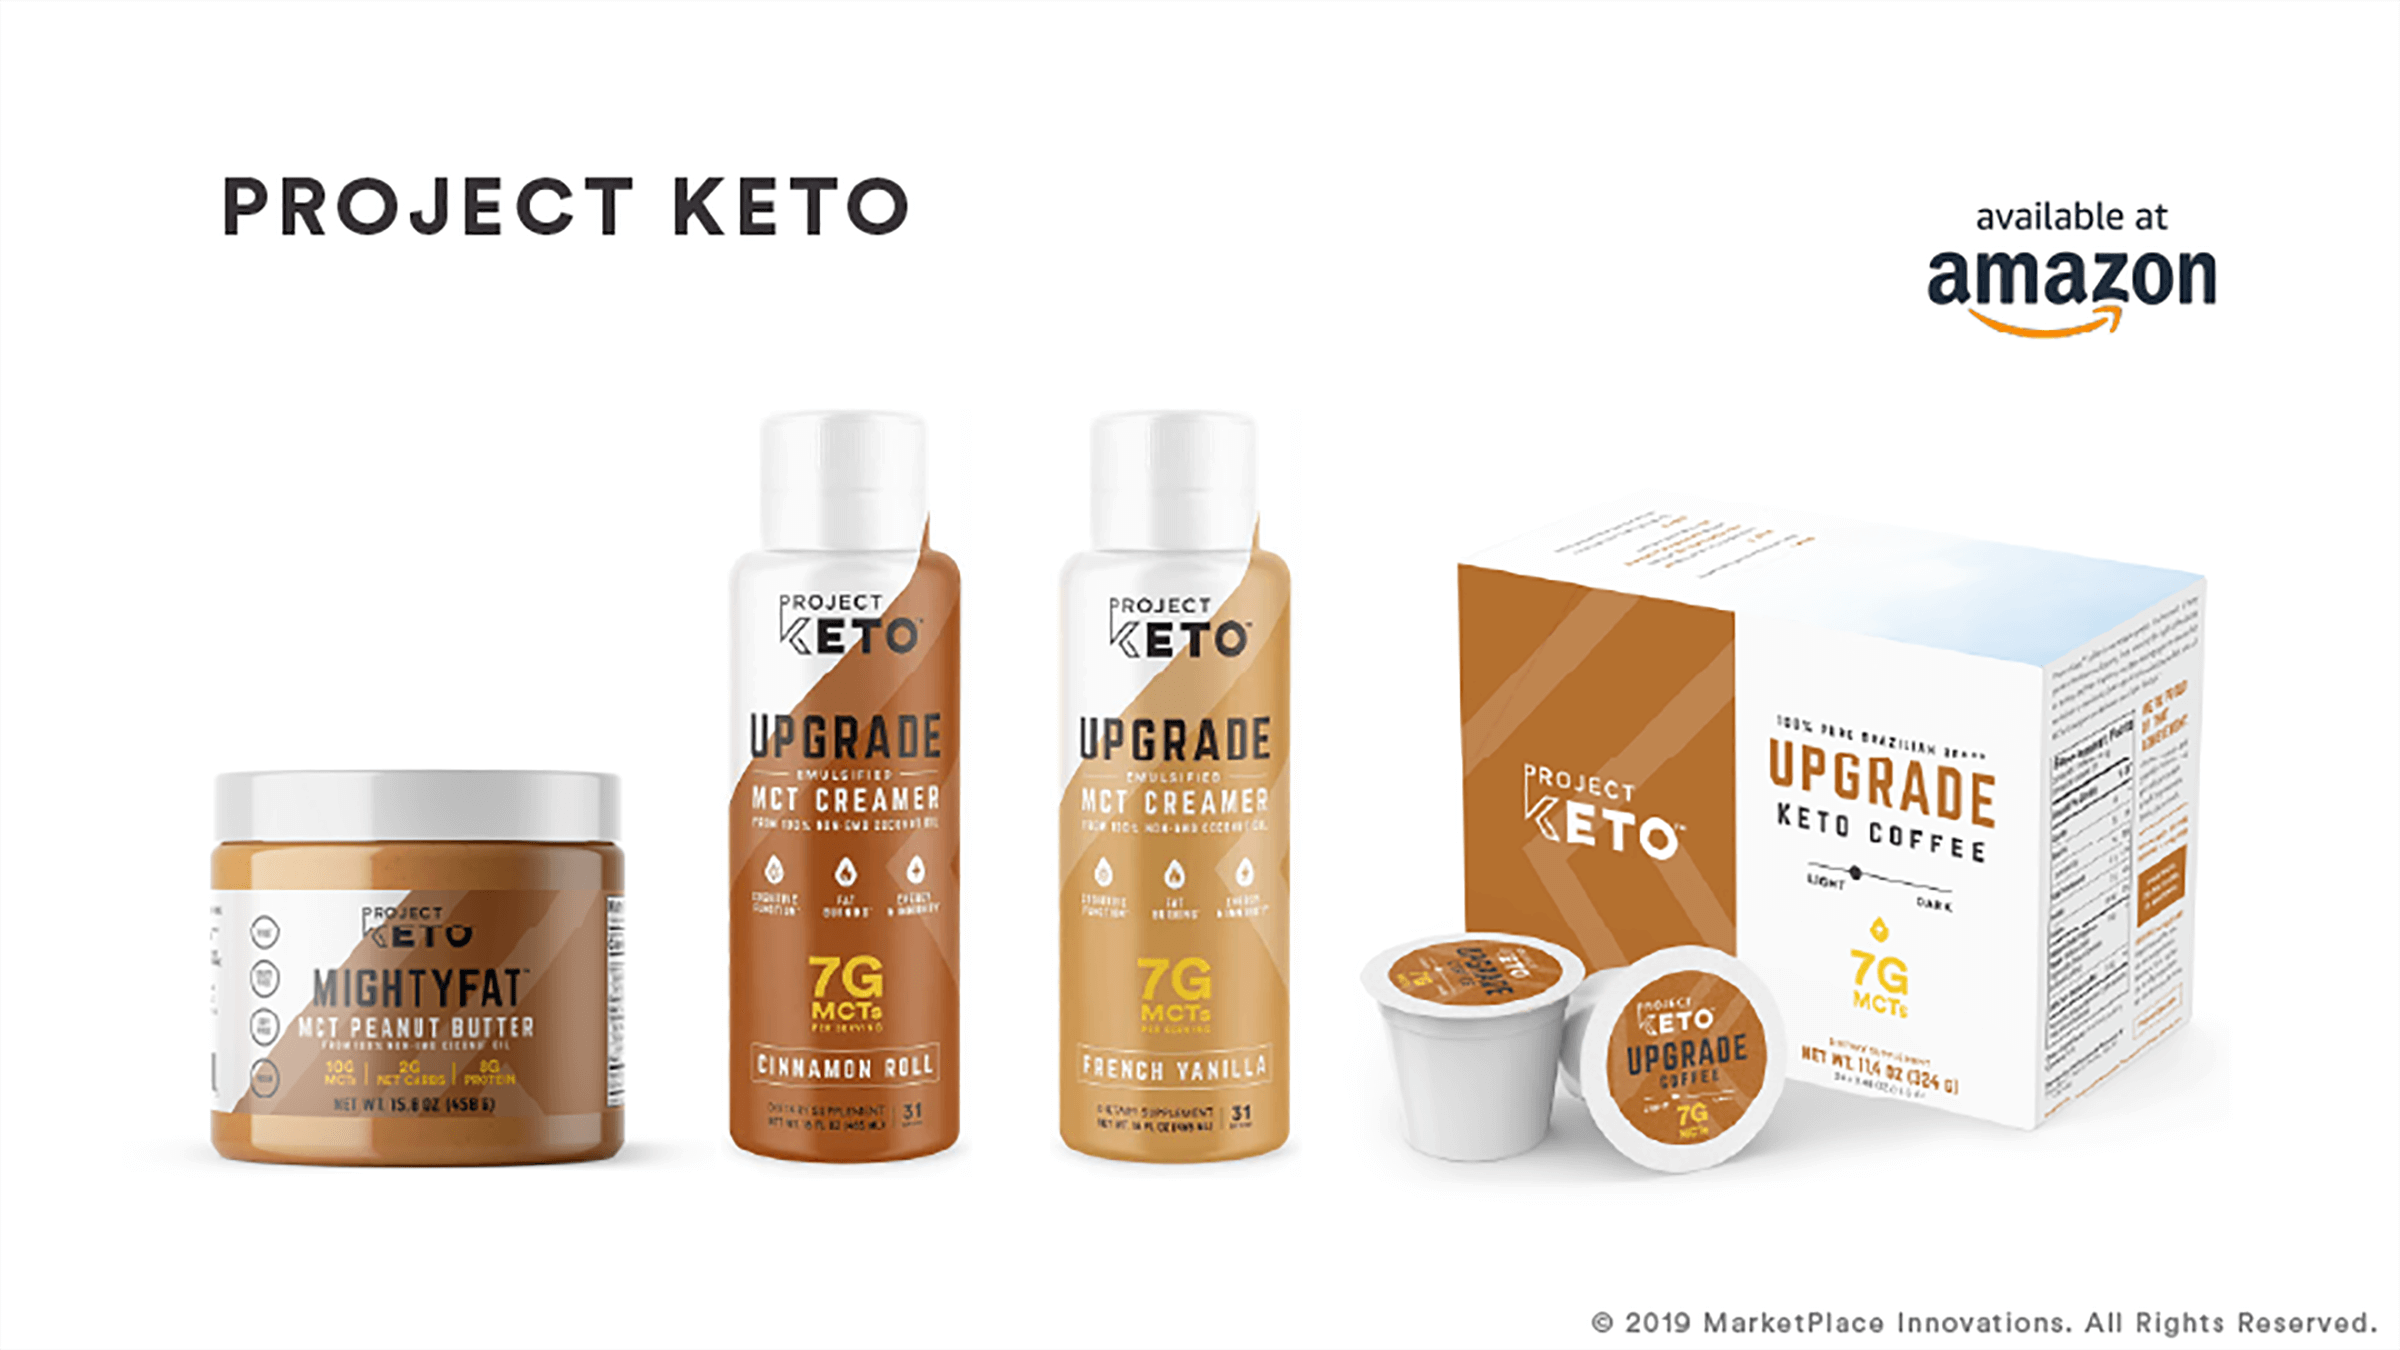 project keto branding and packaging